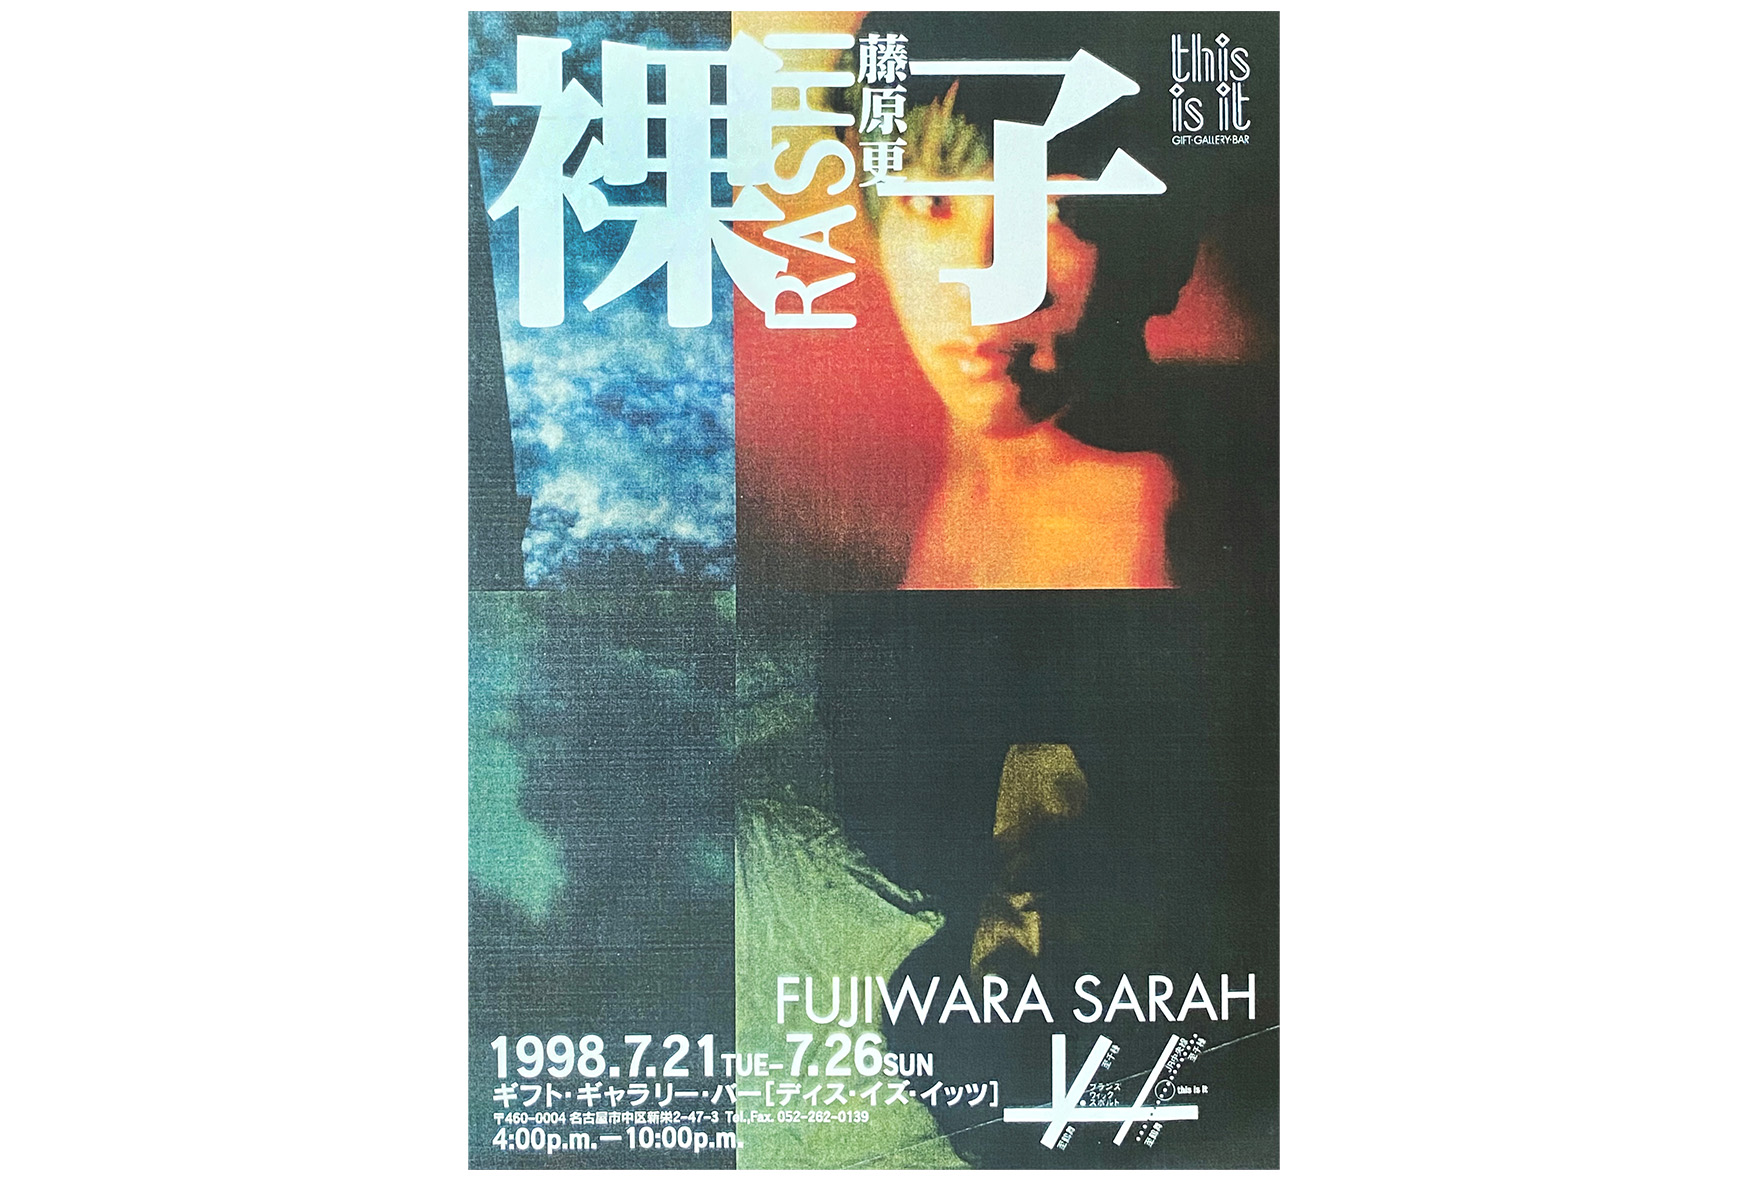 Naked裸子, Gallery THIS IS IT, Nagoya Japan, July 21-26, 1998, solo show